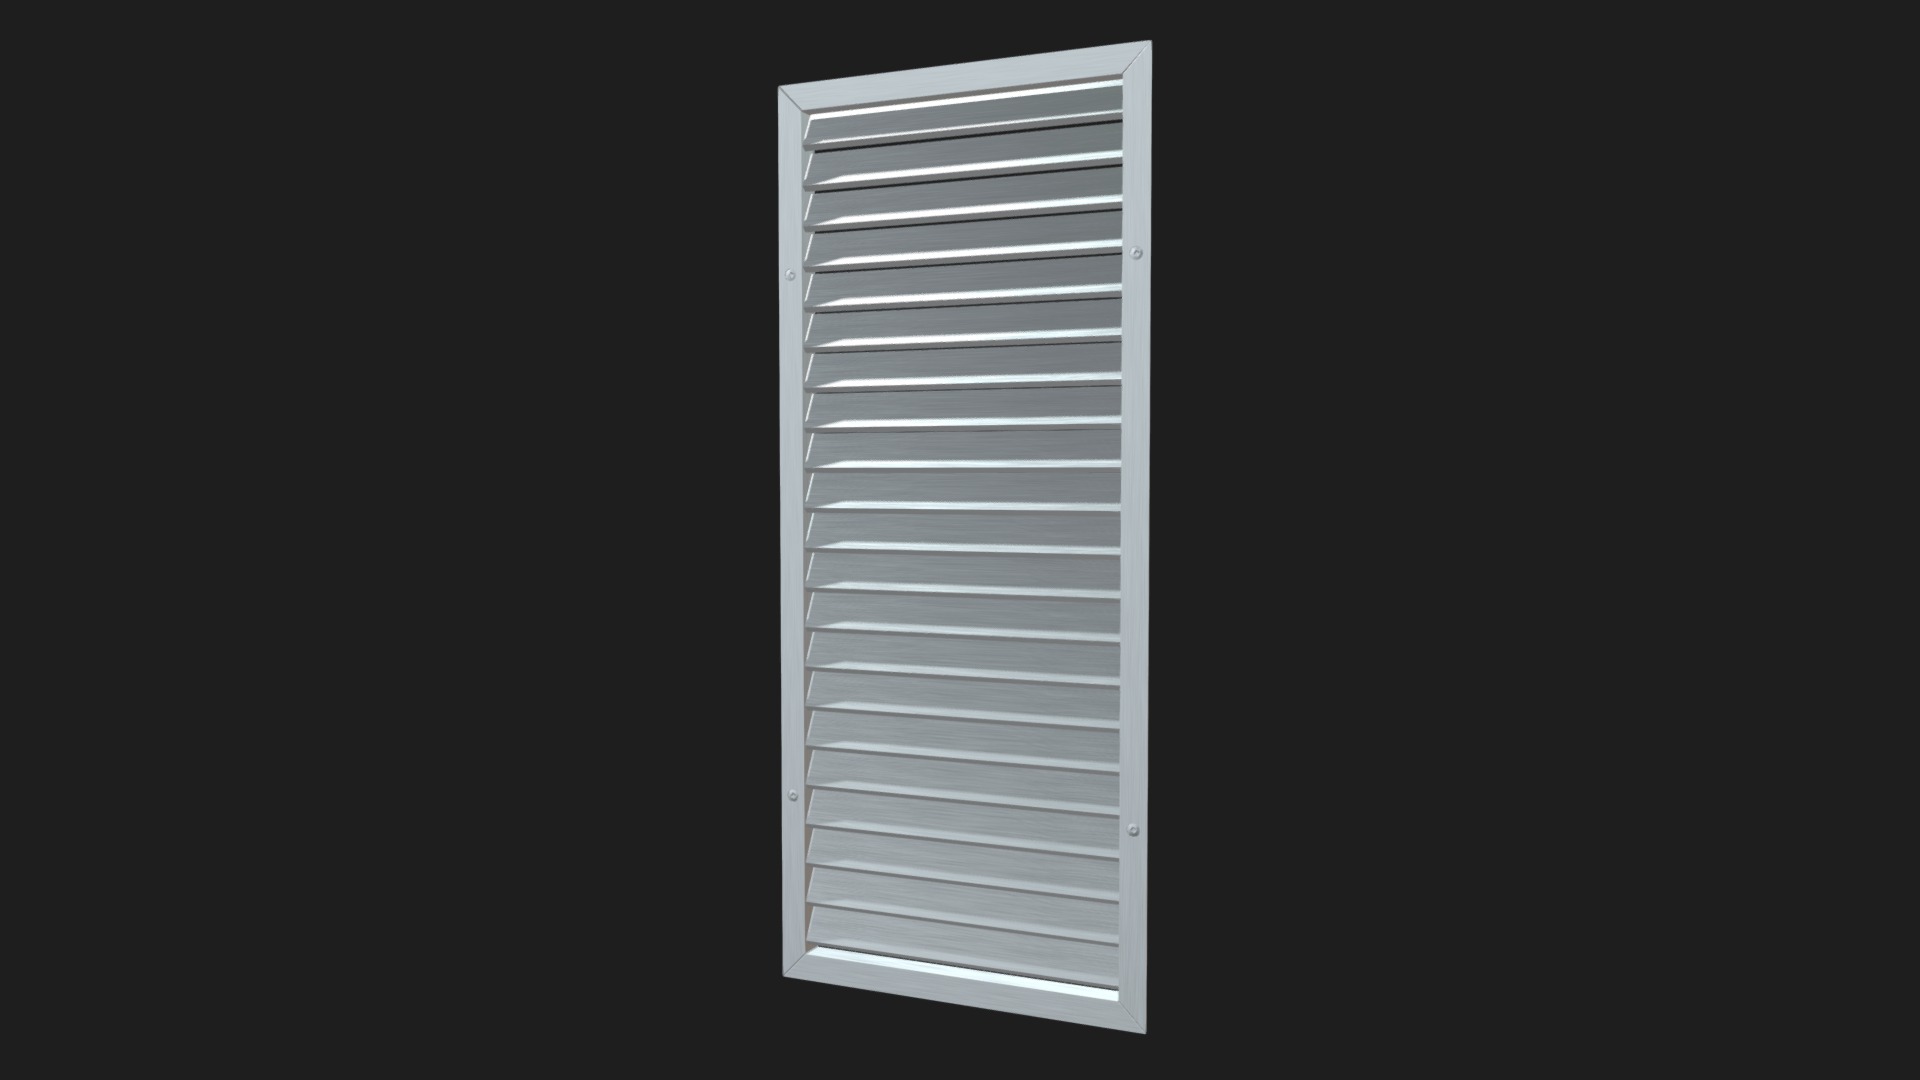 3D model Air vent 1 - This is a 3D model of the Air vent 1. The 3D model is about a white rectangle with a black background.